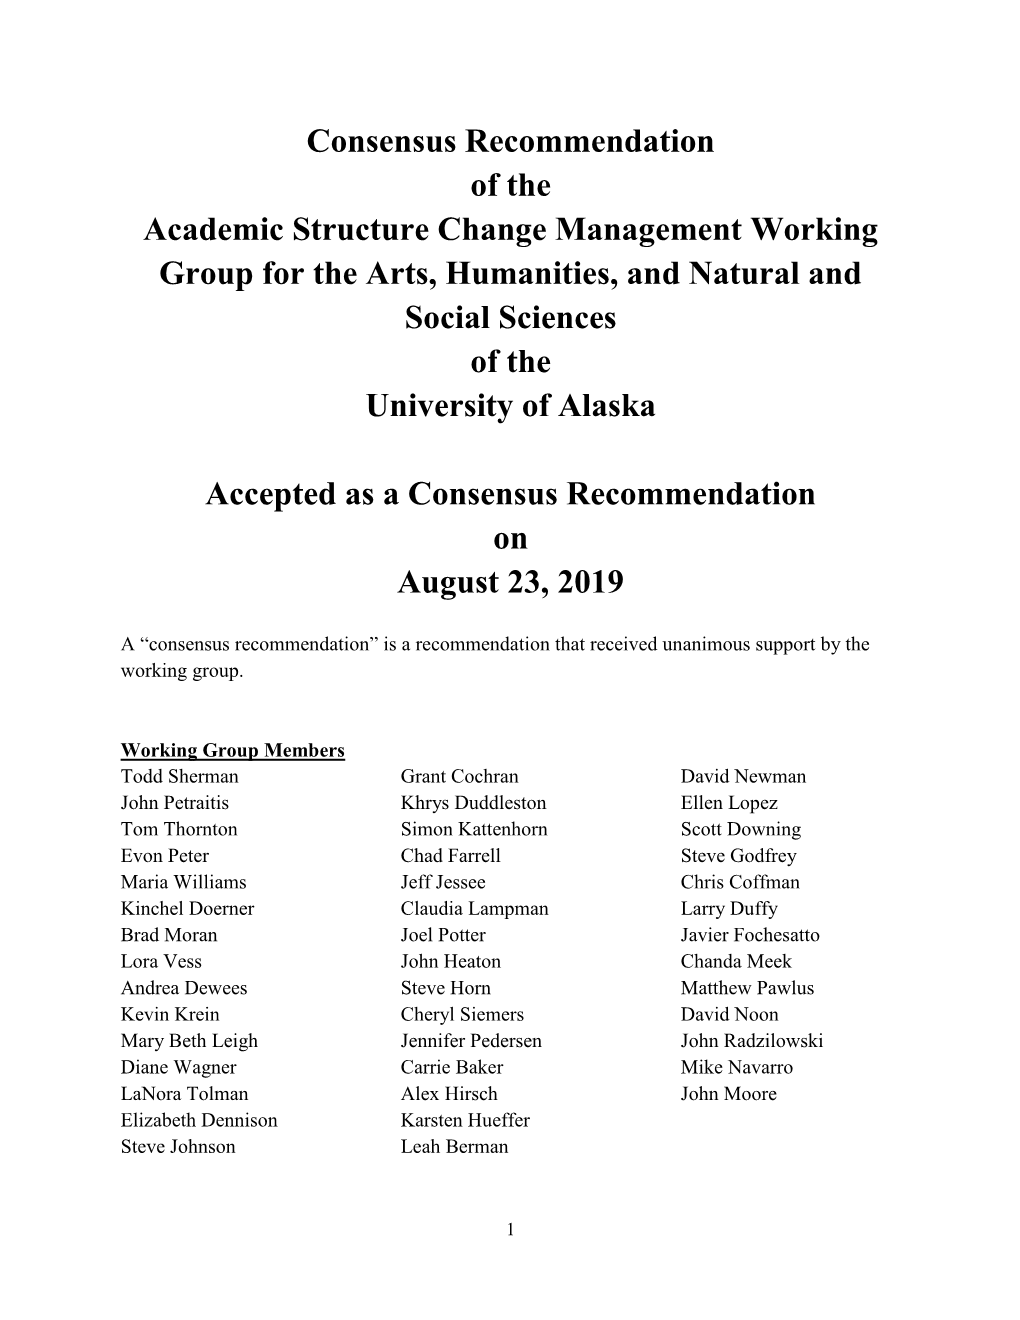 Consensus Recommendation of the Academic Structure Change